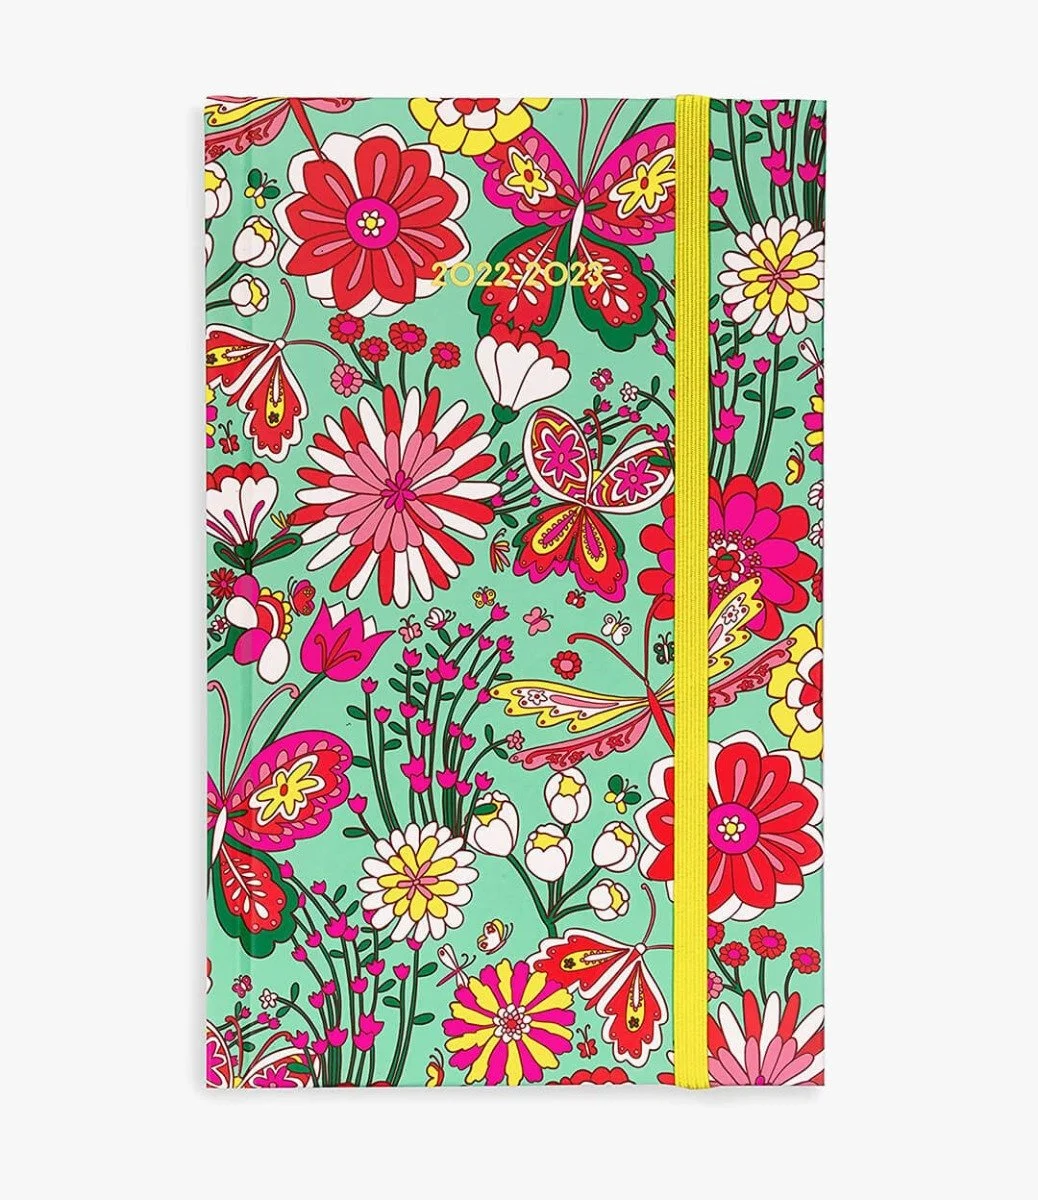 17 Month Classic Planner, Magic Garden Mint by Ban.do